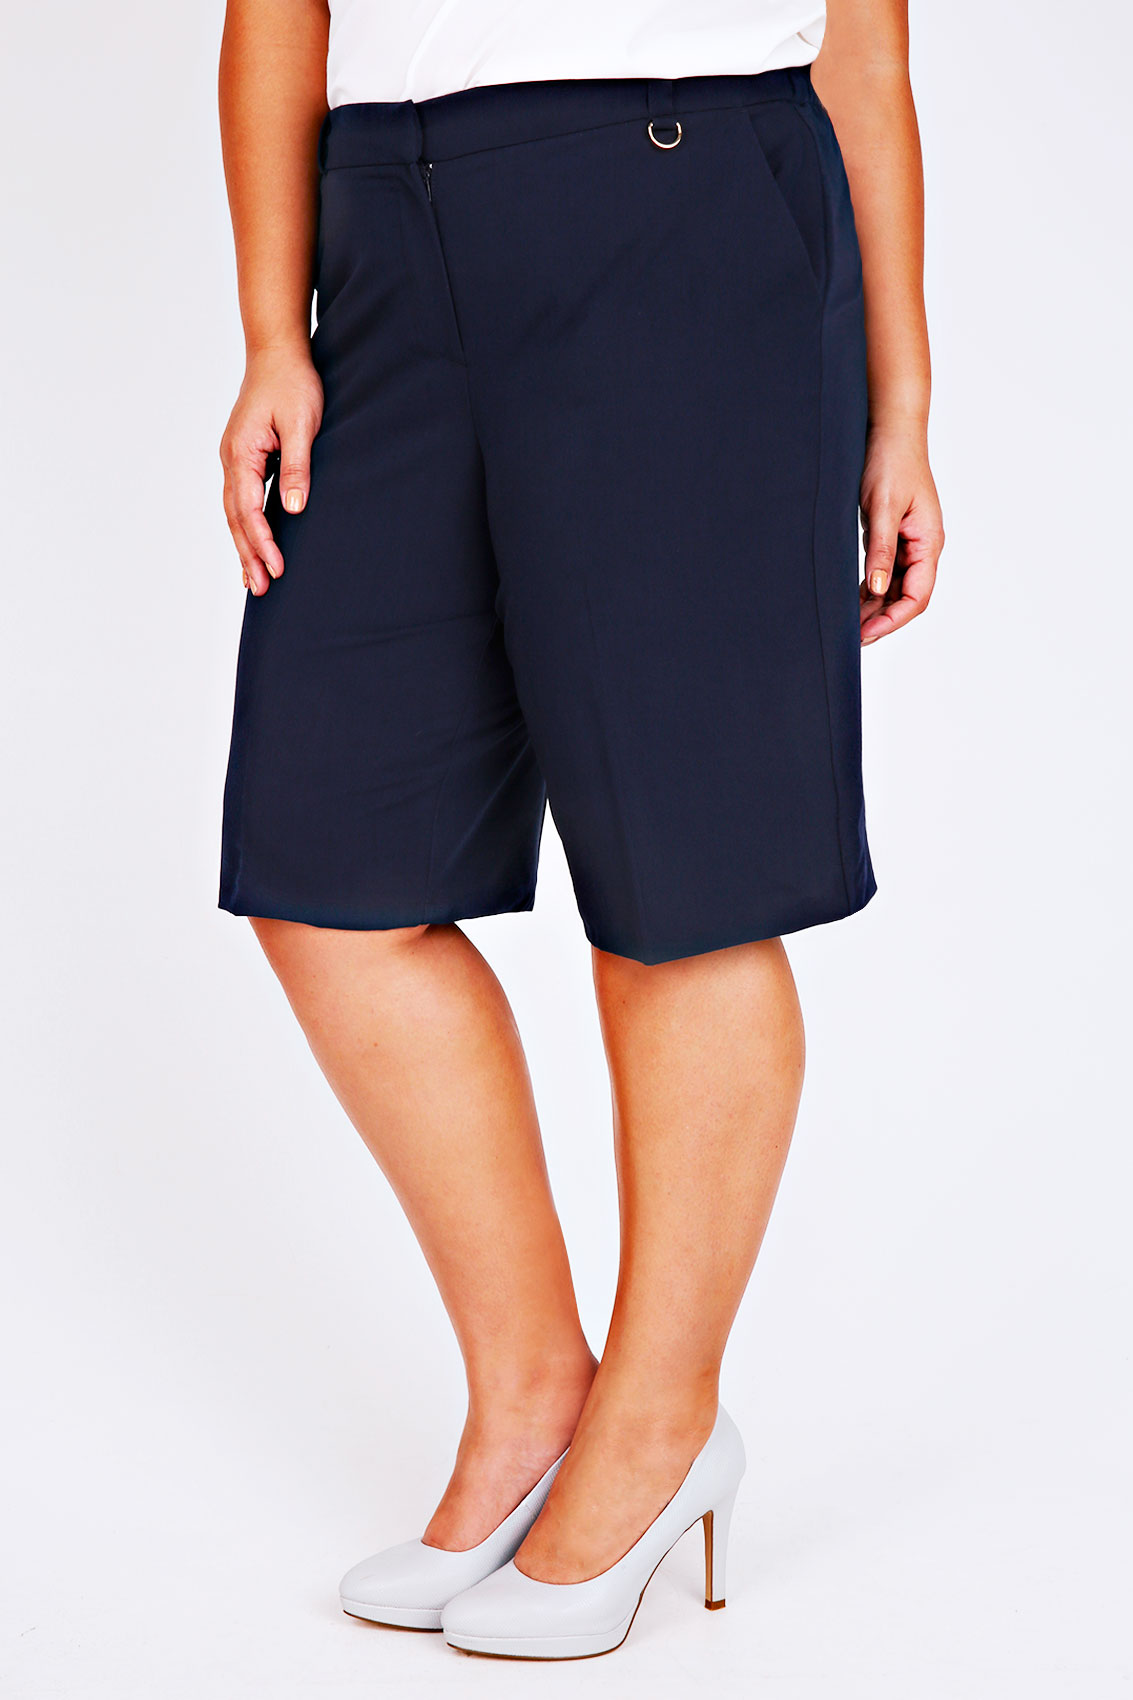 Navy Tailored Shorts Plus Size 14 To 28